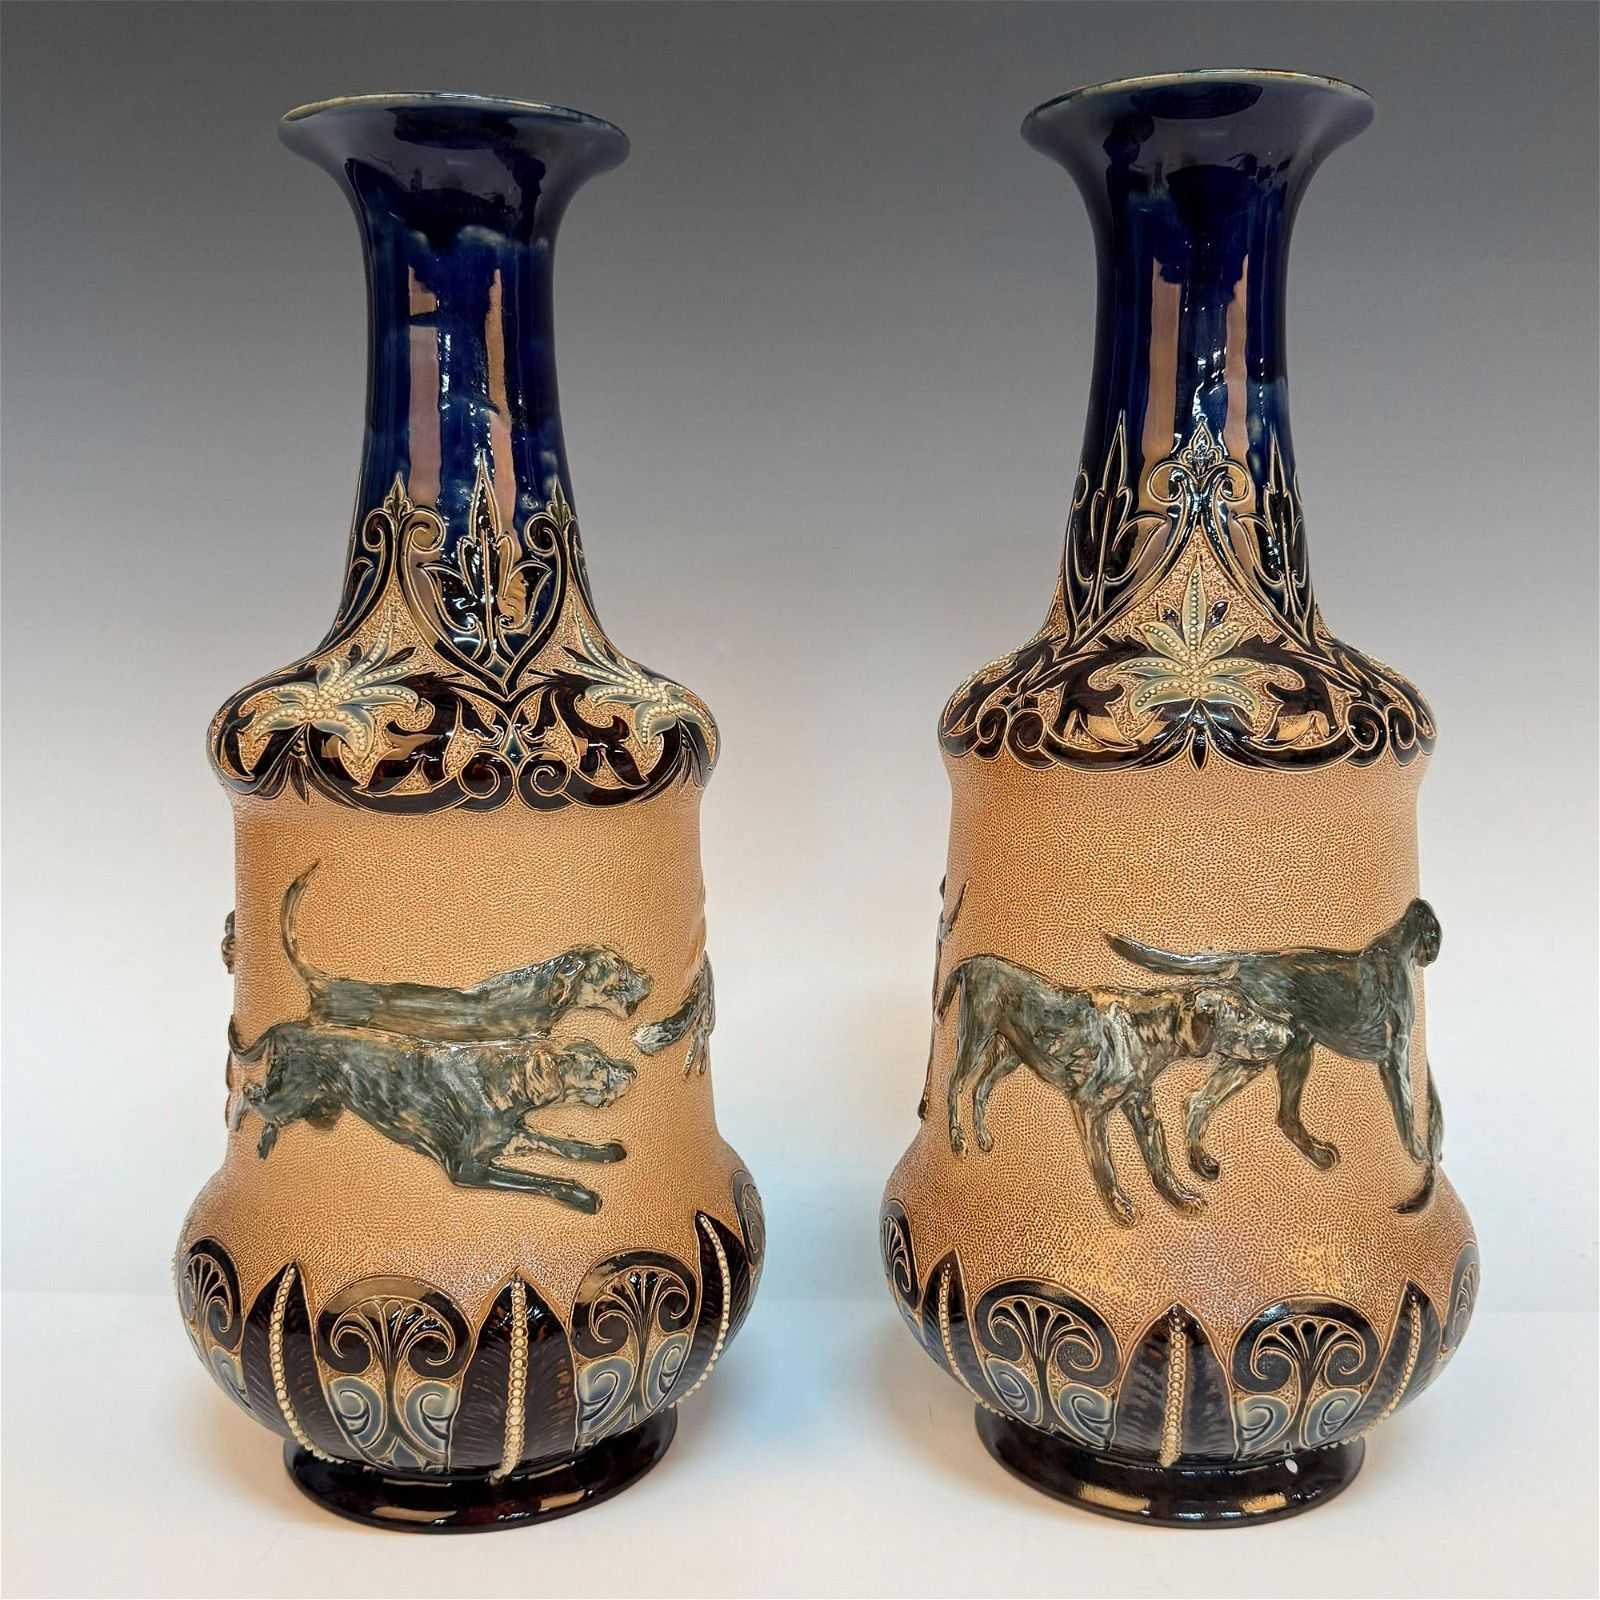 Doulton stoneware vases decorated in pâte-sur-pâte by Hannah Barlow, which hammered for $6,250 and sold for $7,812 with buyer’s premium at Lion and Unicorn on March 26.